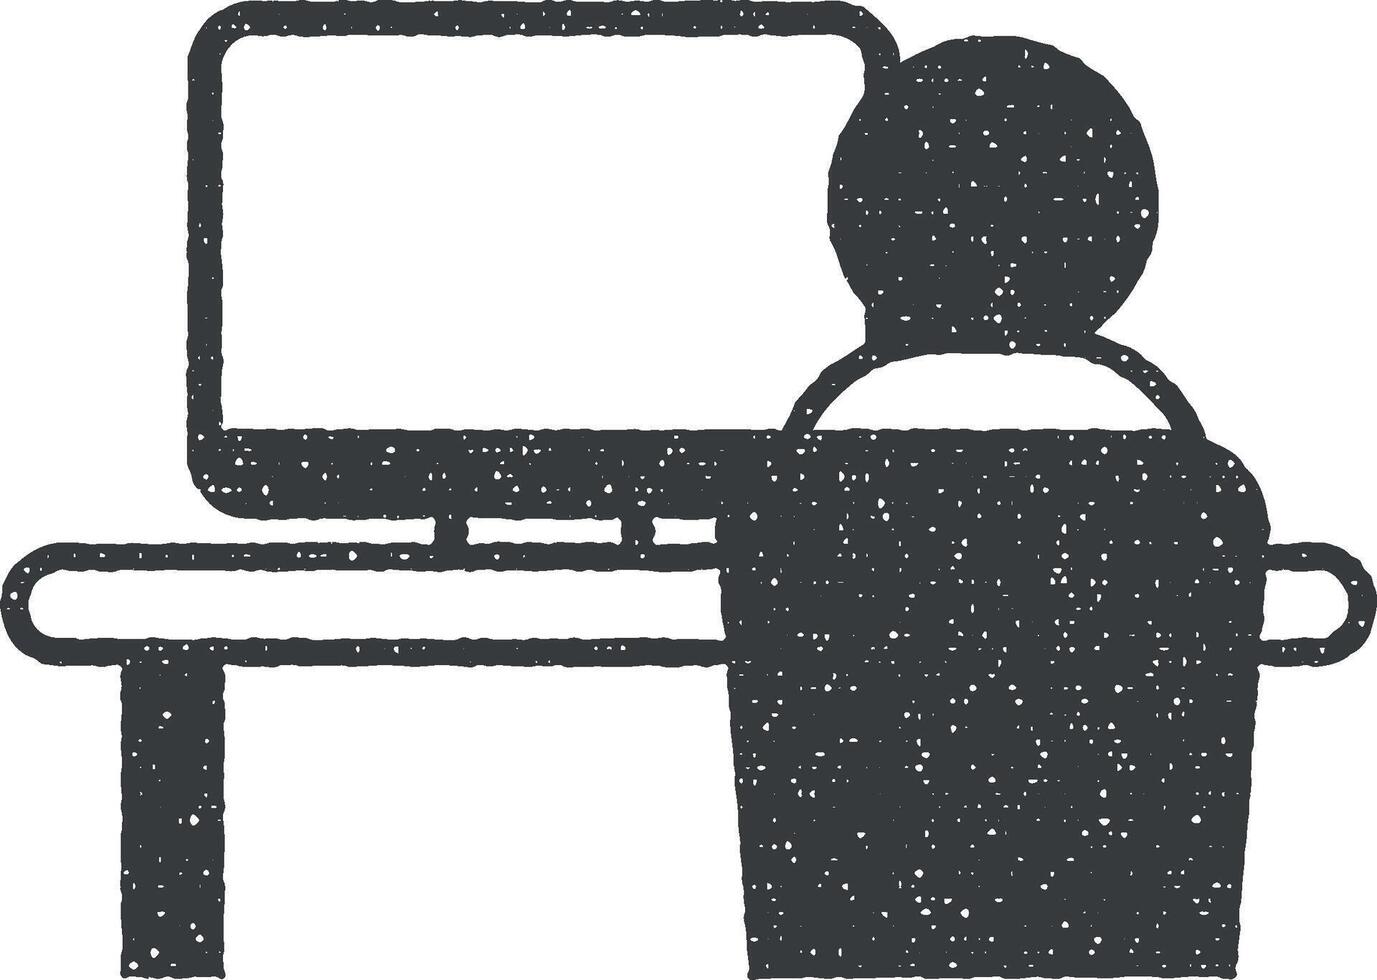 man computer vector icon illustration with stamp effect